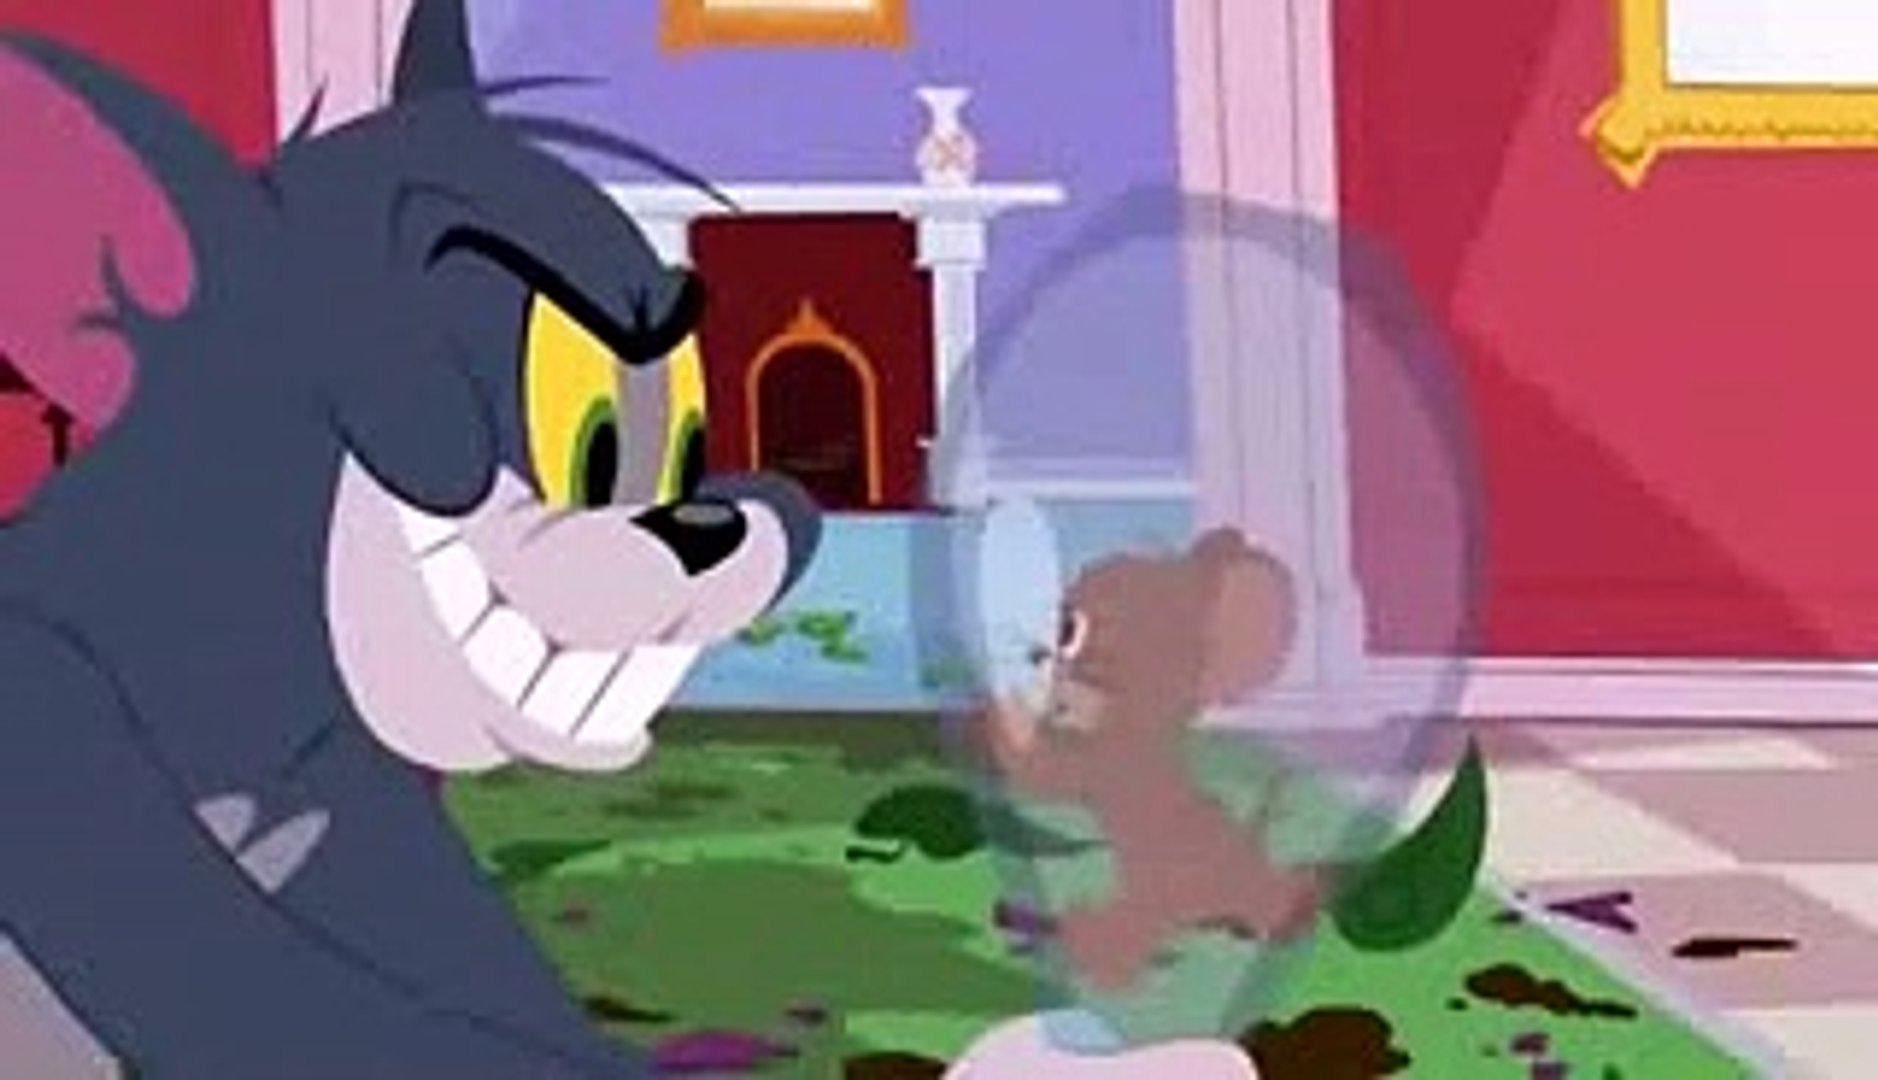 tom and jerry cartoon 7 - video Dailymotion